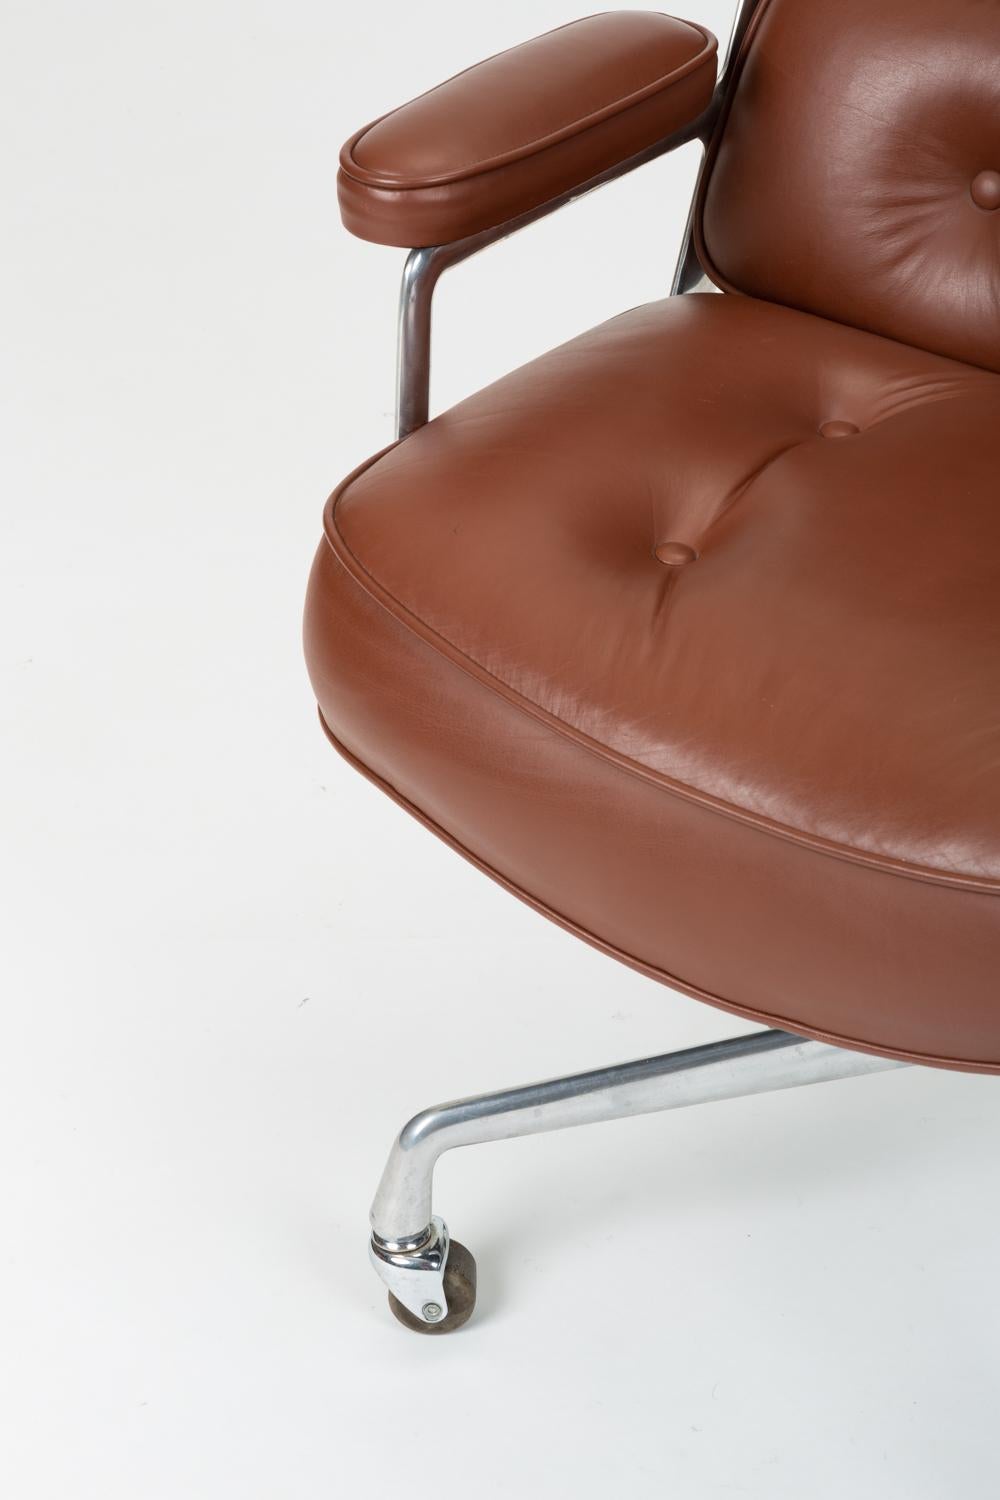 Ray + Charles Eames Time Life Lobby Chair in Chocolate Leather 7